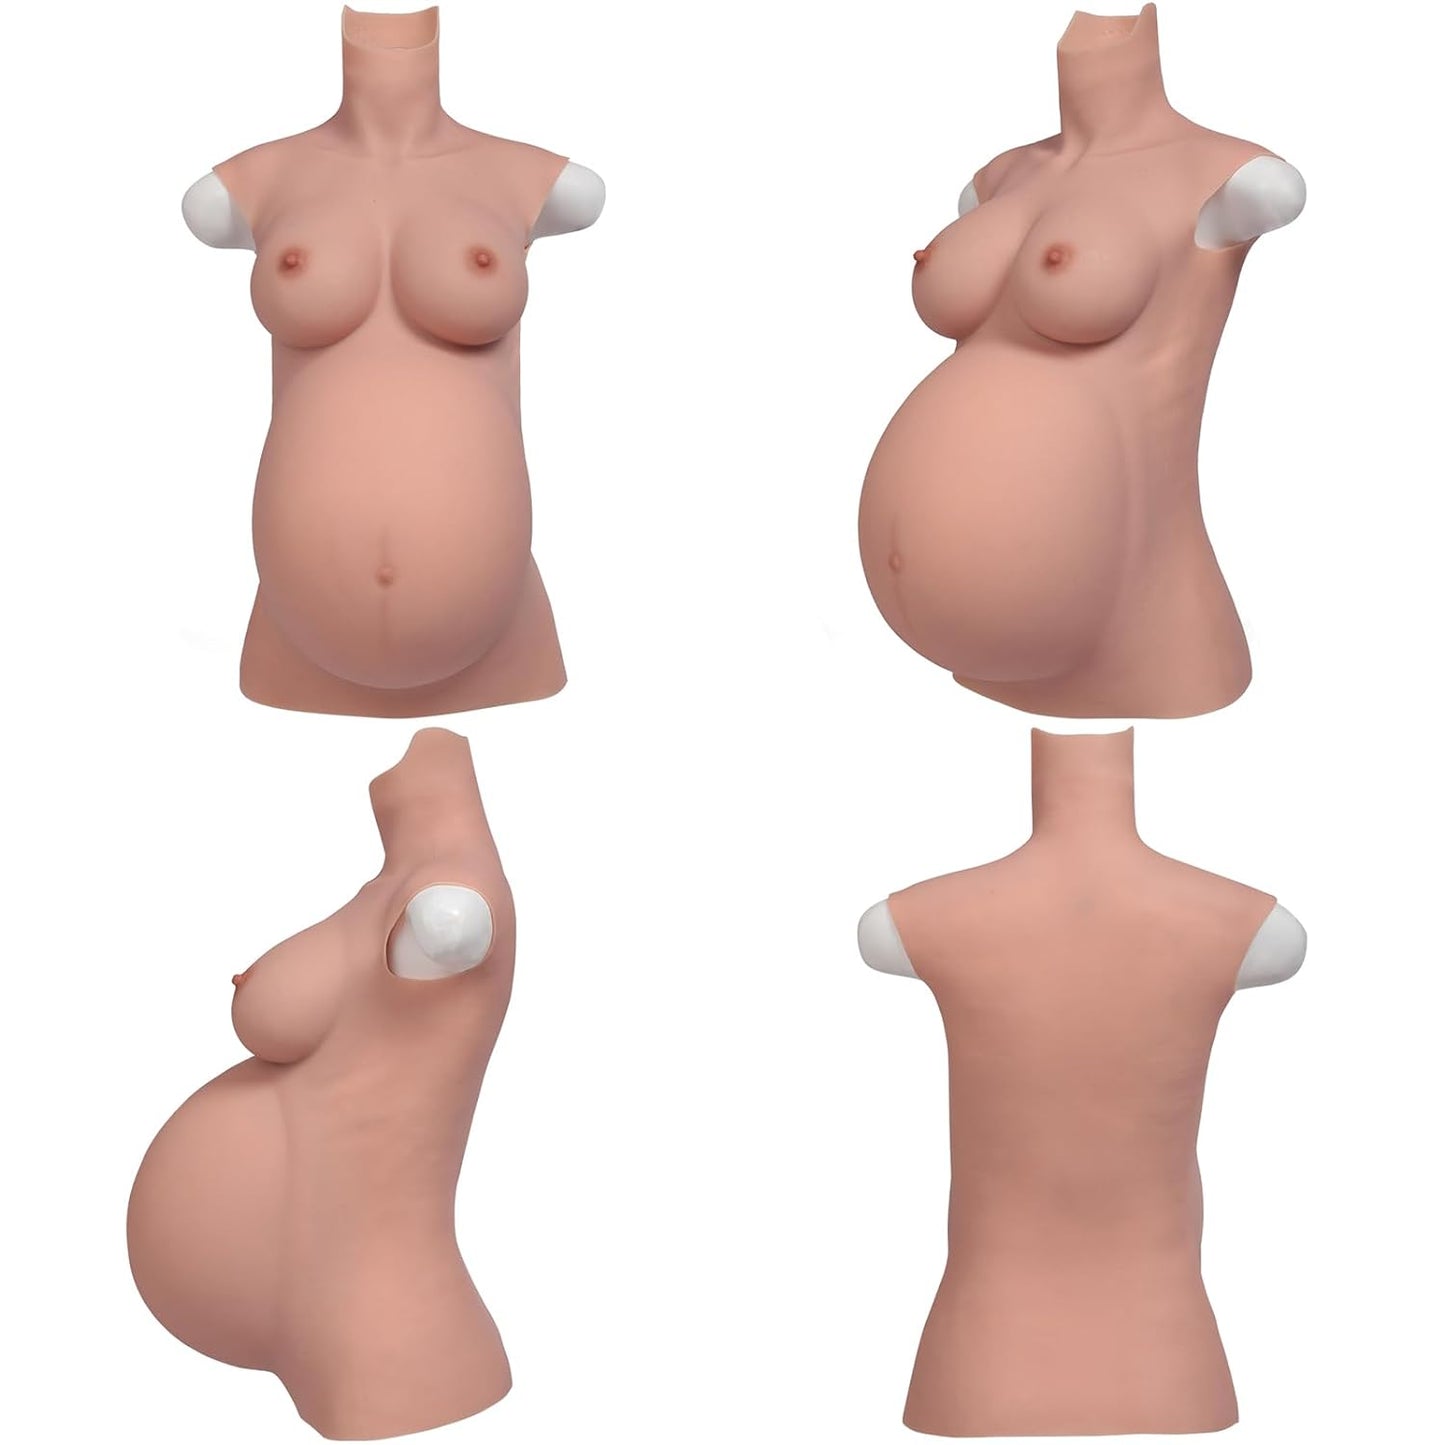 8th Pregnant Belly Fake Pregnant Crossdresser Cosplay Unisex Prosthetic Props Fake Silicone Breast Forms Drag Que